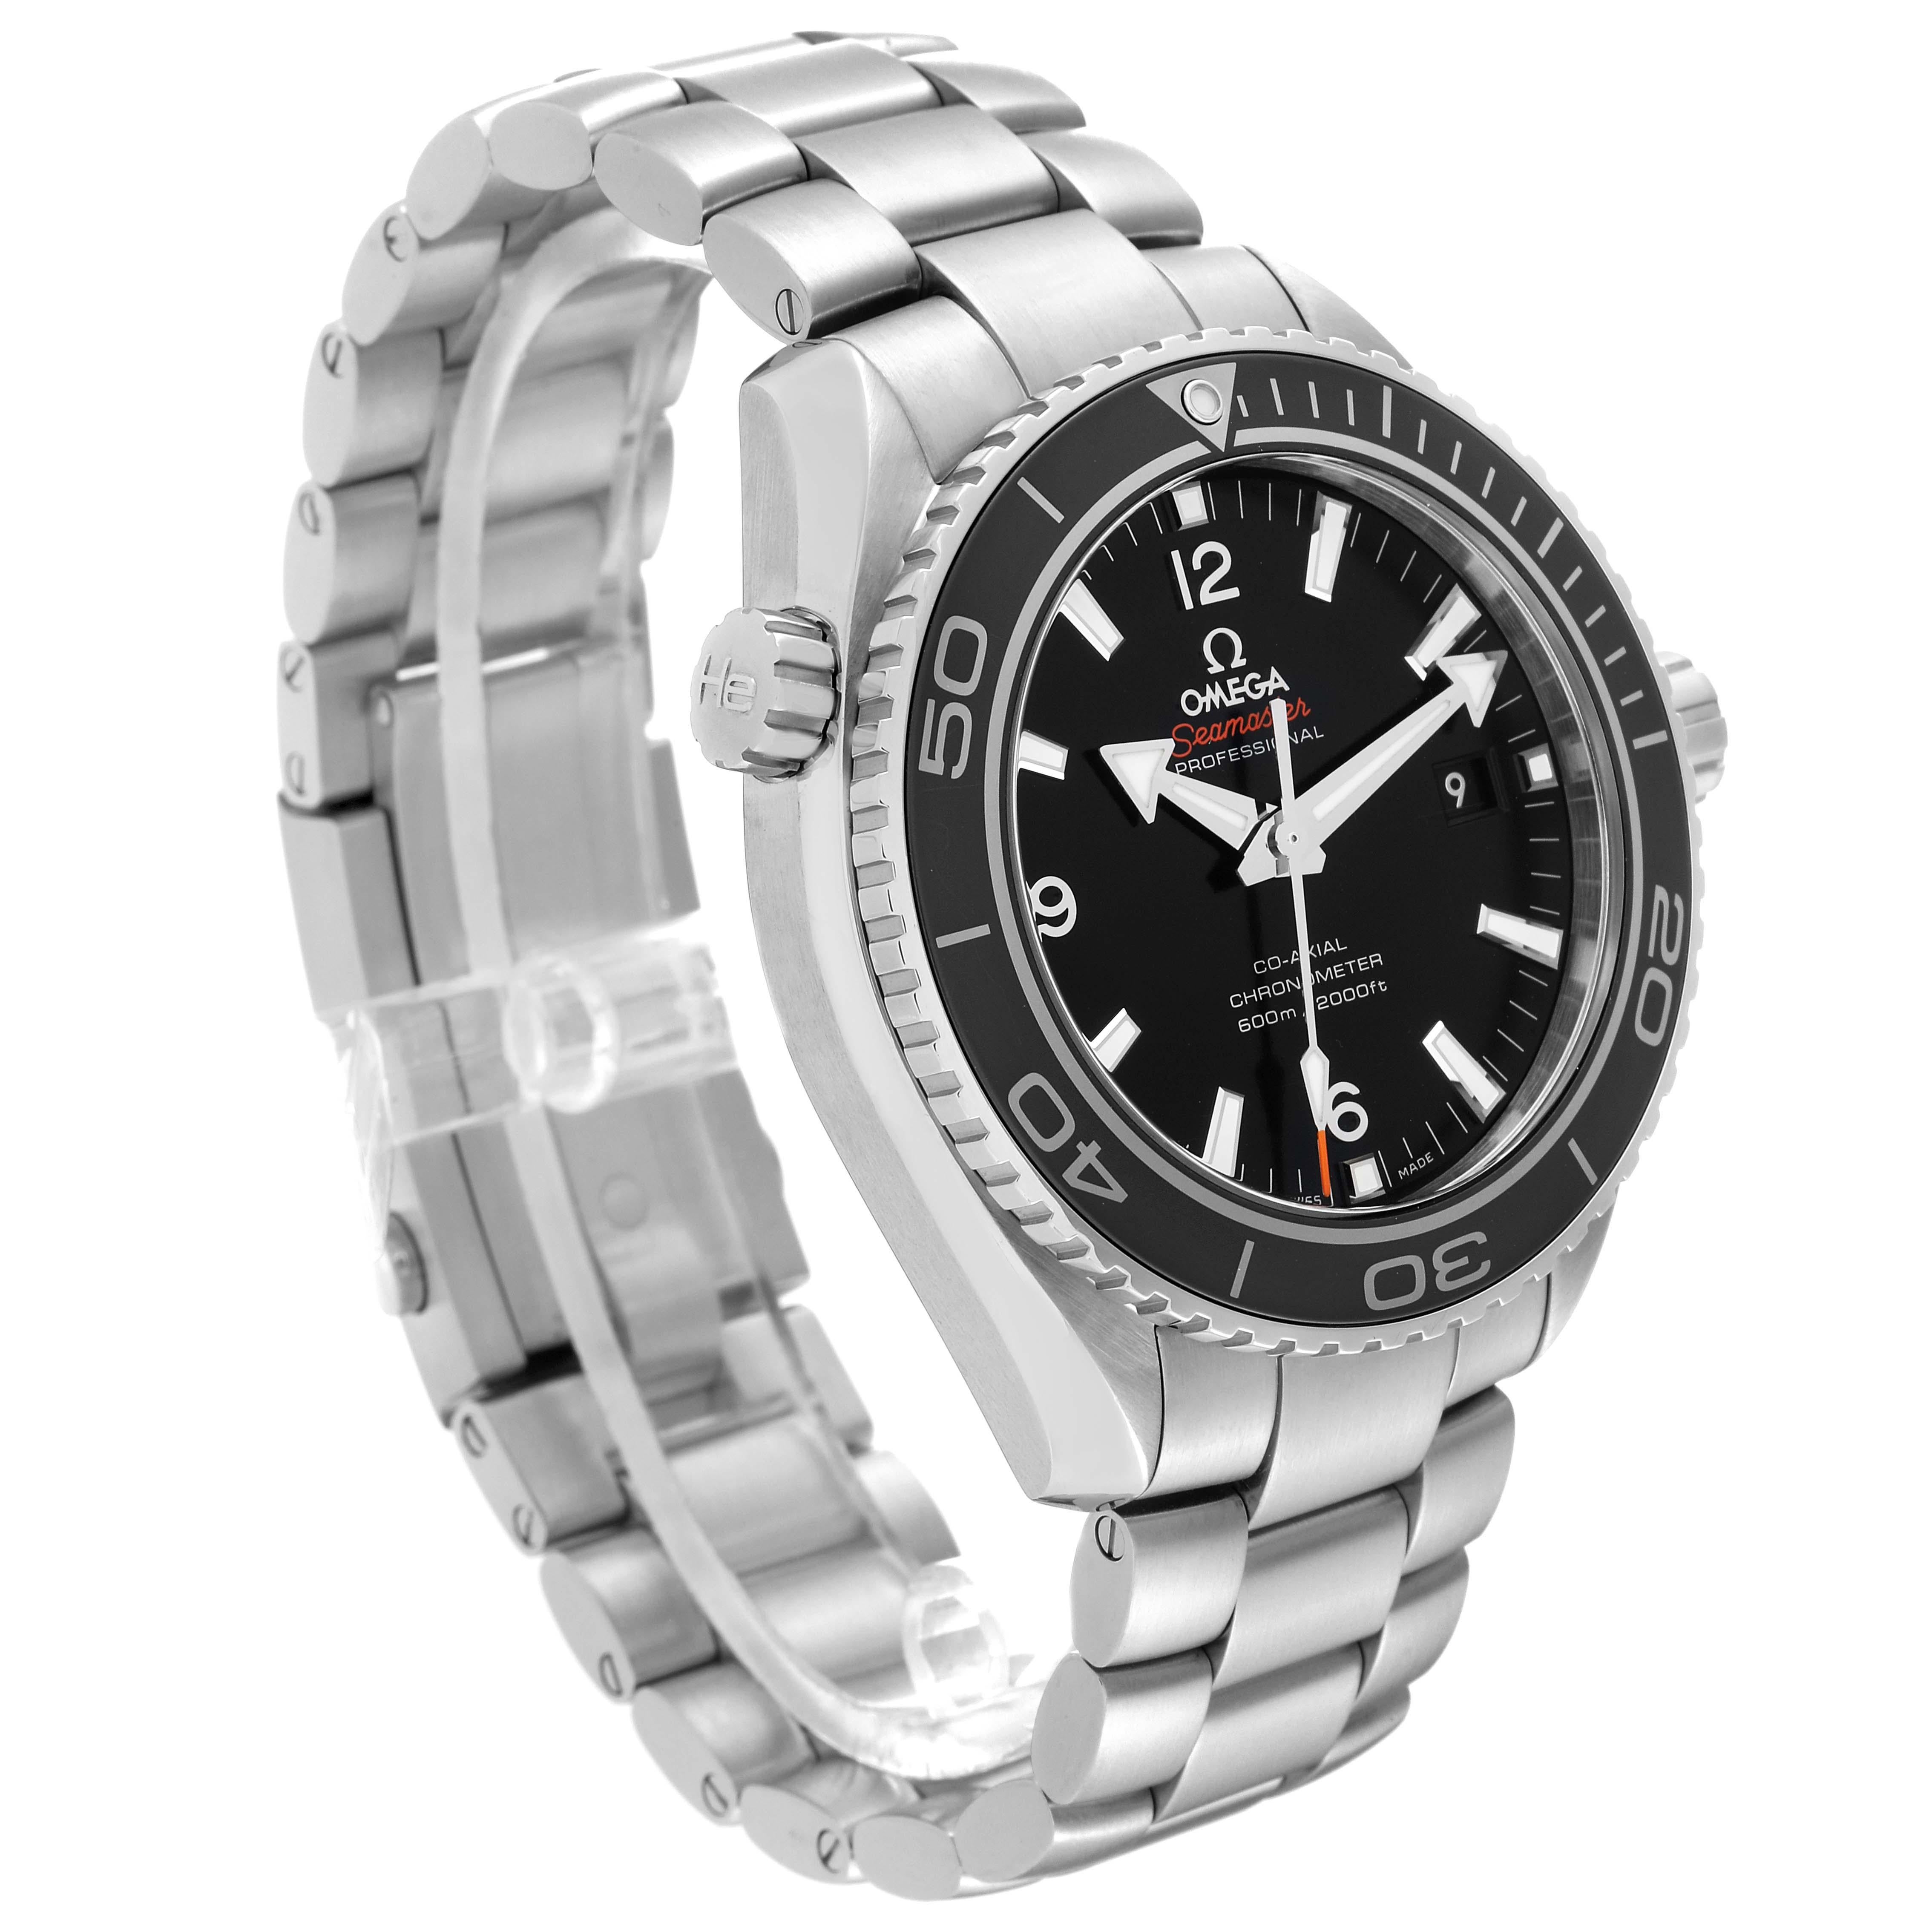 Omega Seamaster Planet Ocean 600M Steel Mens Watch 232.30.46.21.01.001 Card For Sale 2